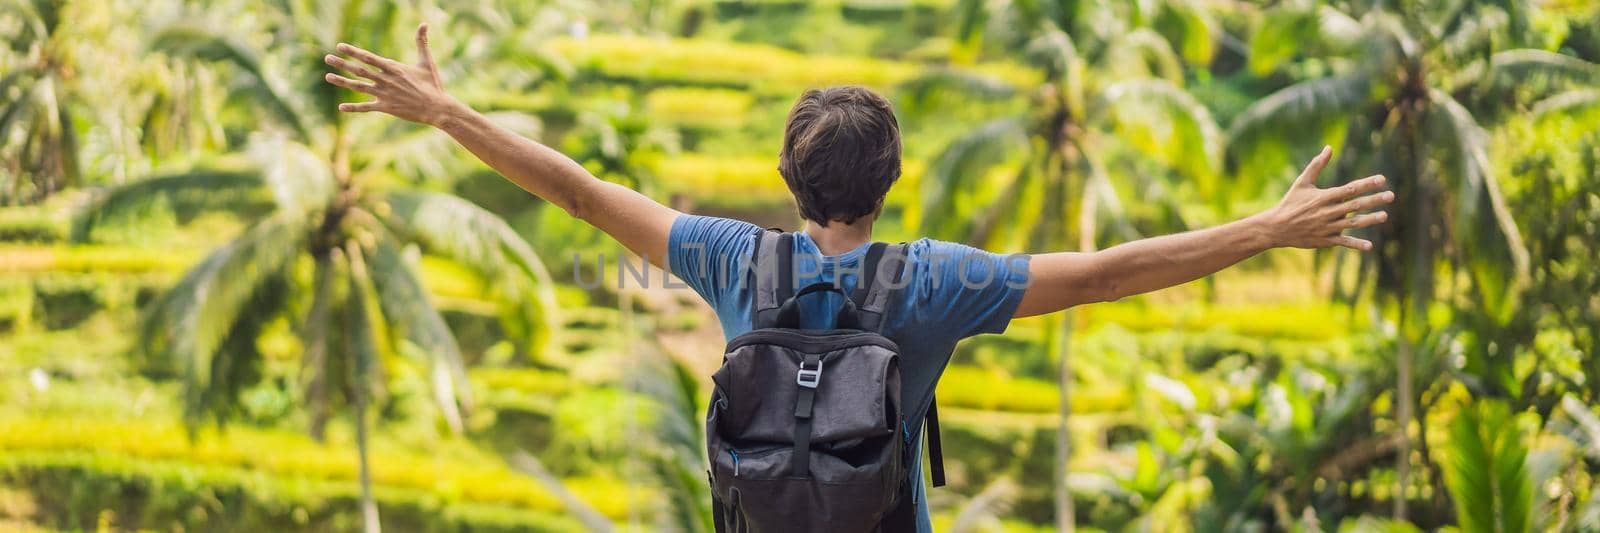 Male tourist with a backpack goes on the rice field BANNER, LONG FORMAT by galitskaya